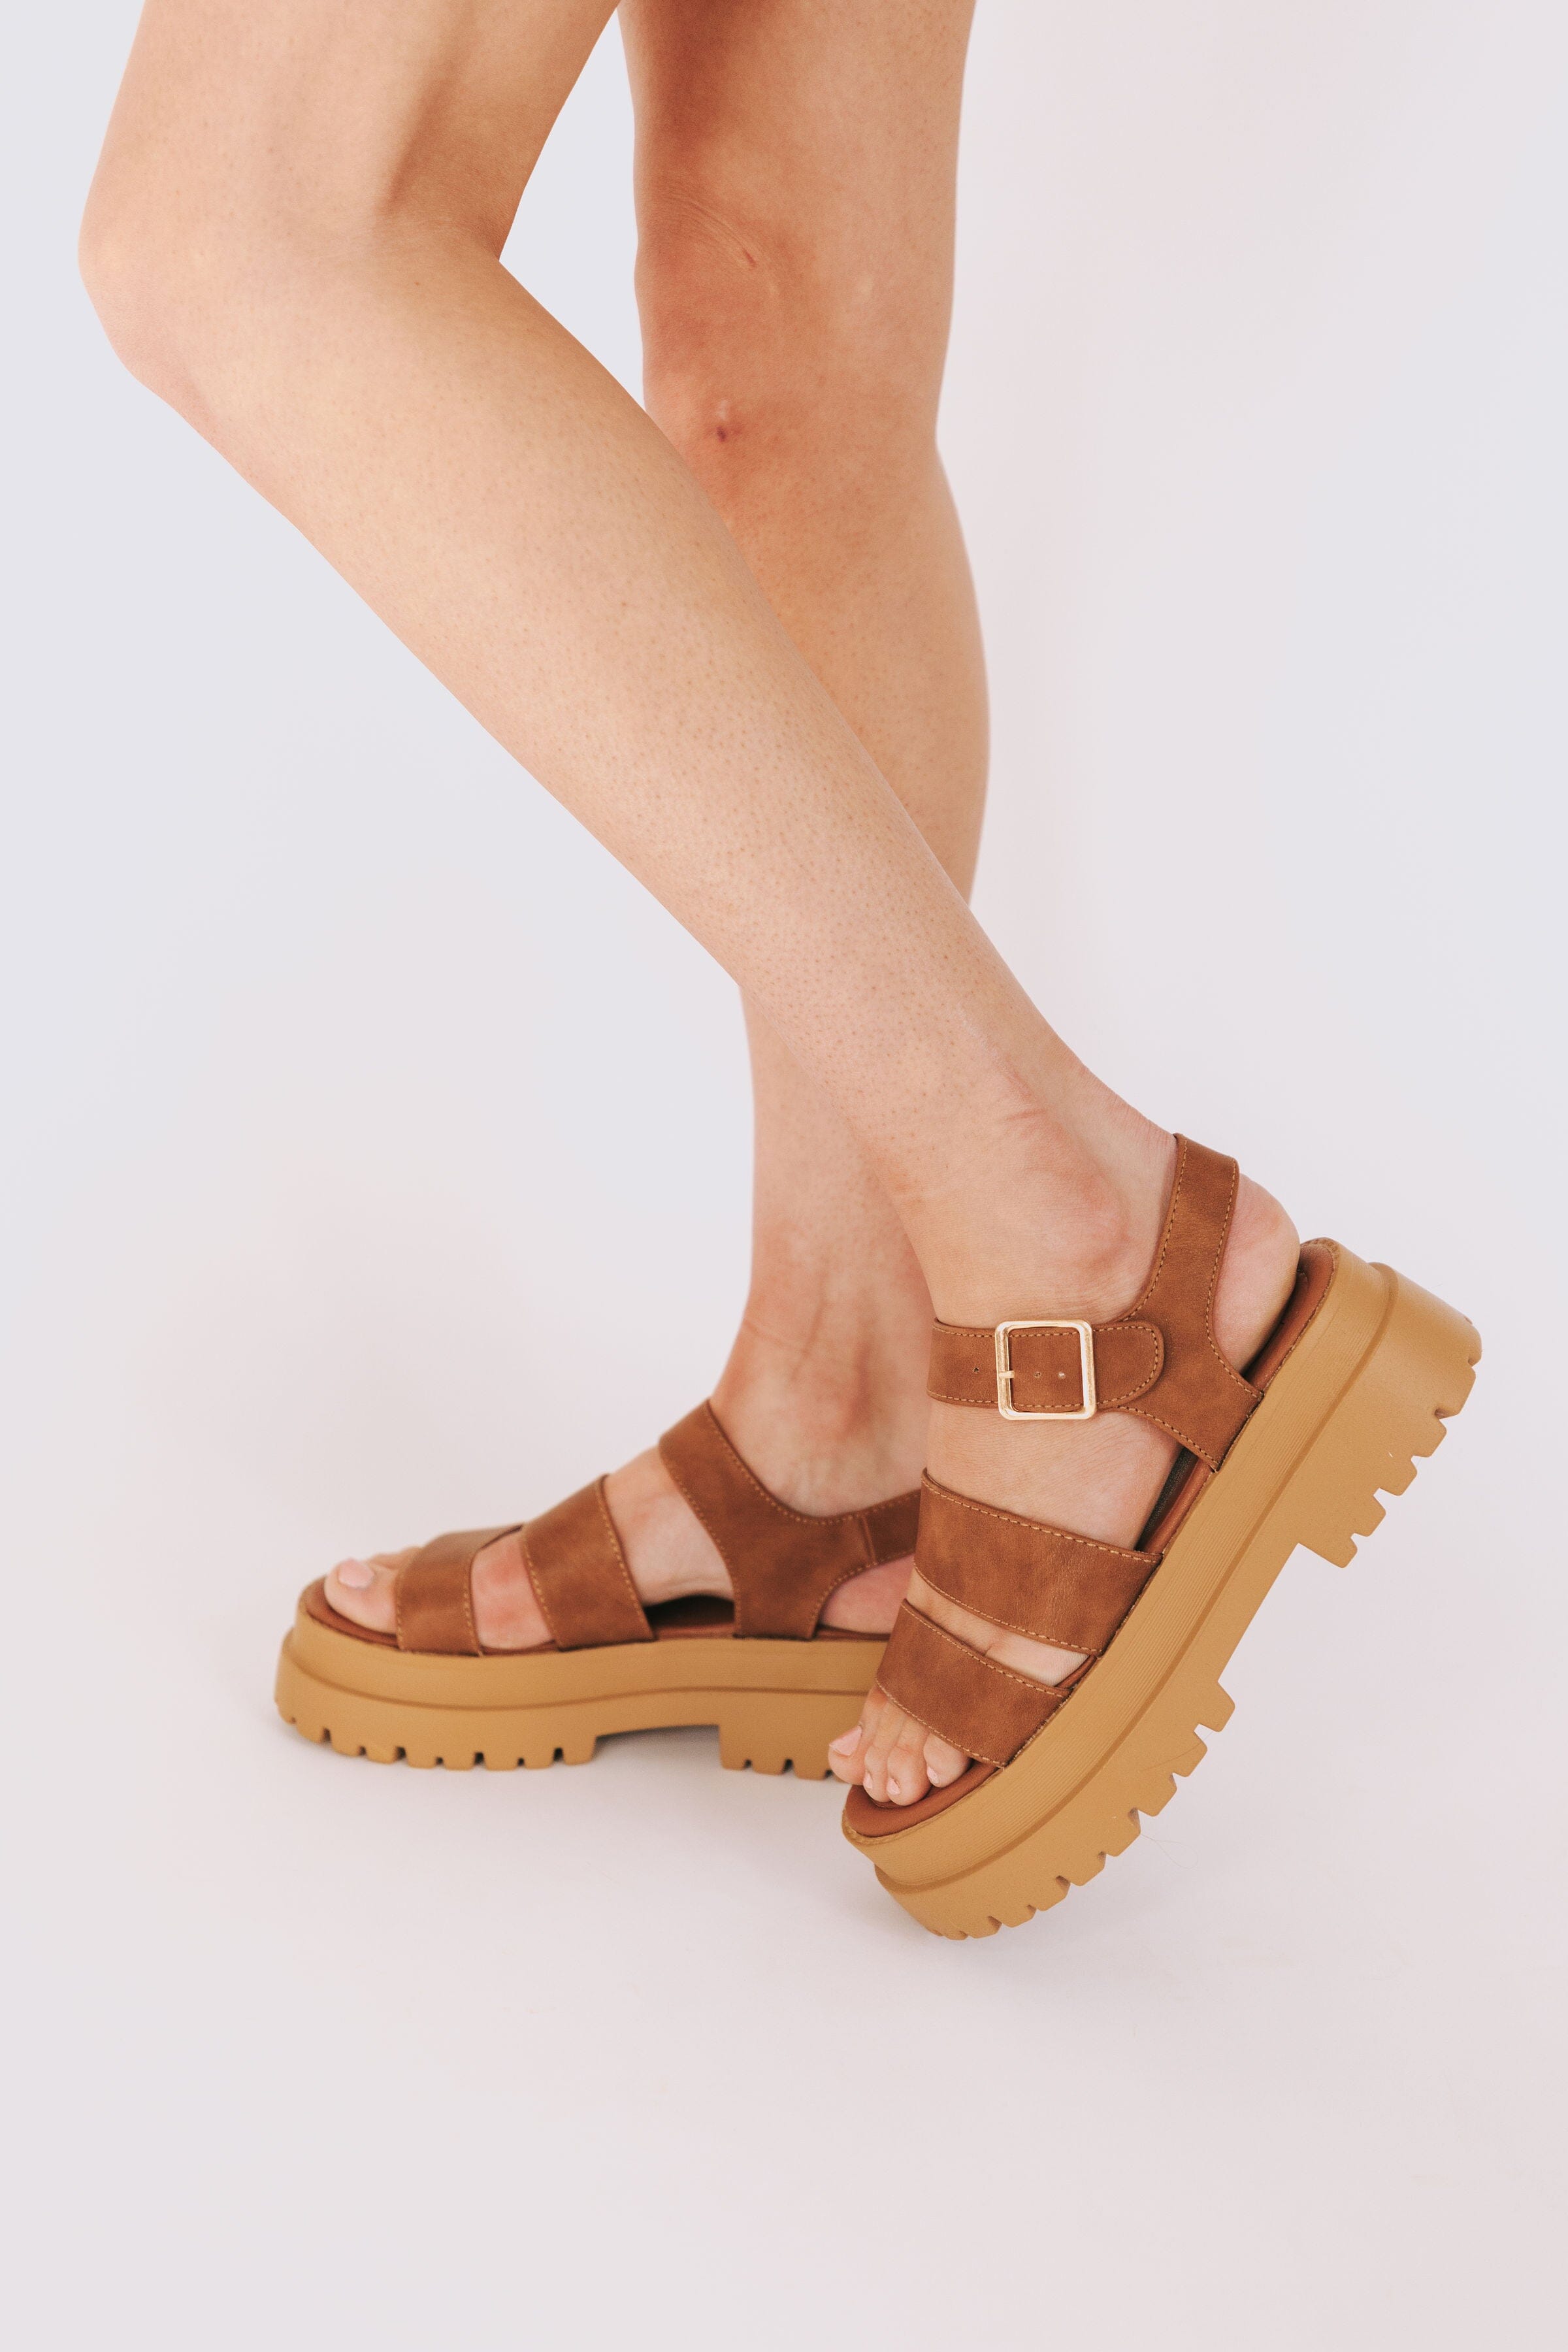 CHINESE LAUNDRY - Baddie Sandals - 2 Colors